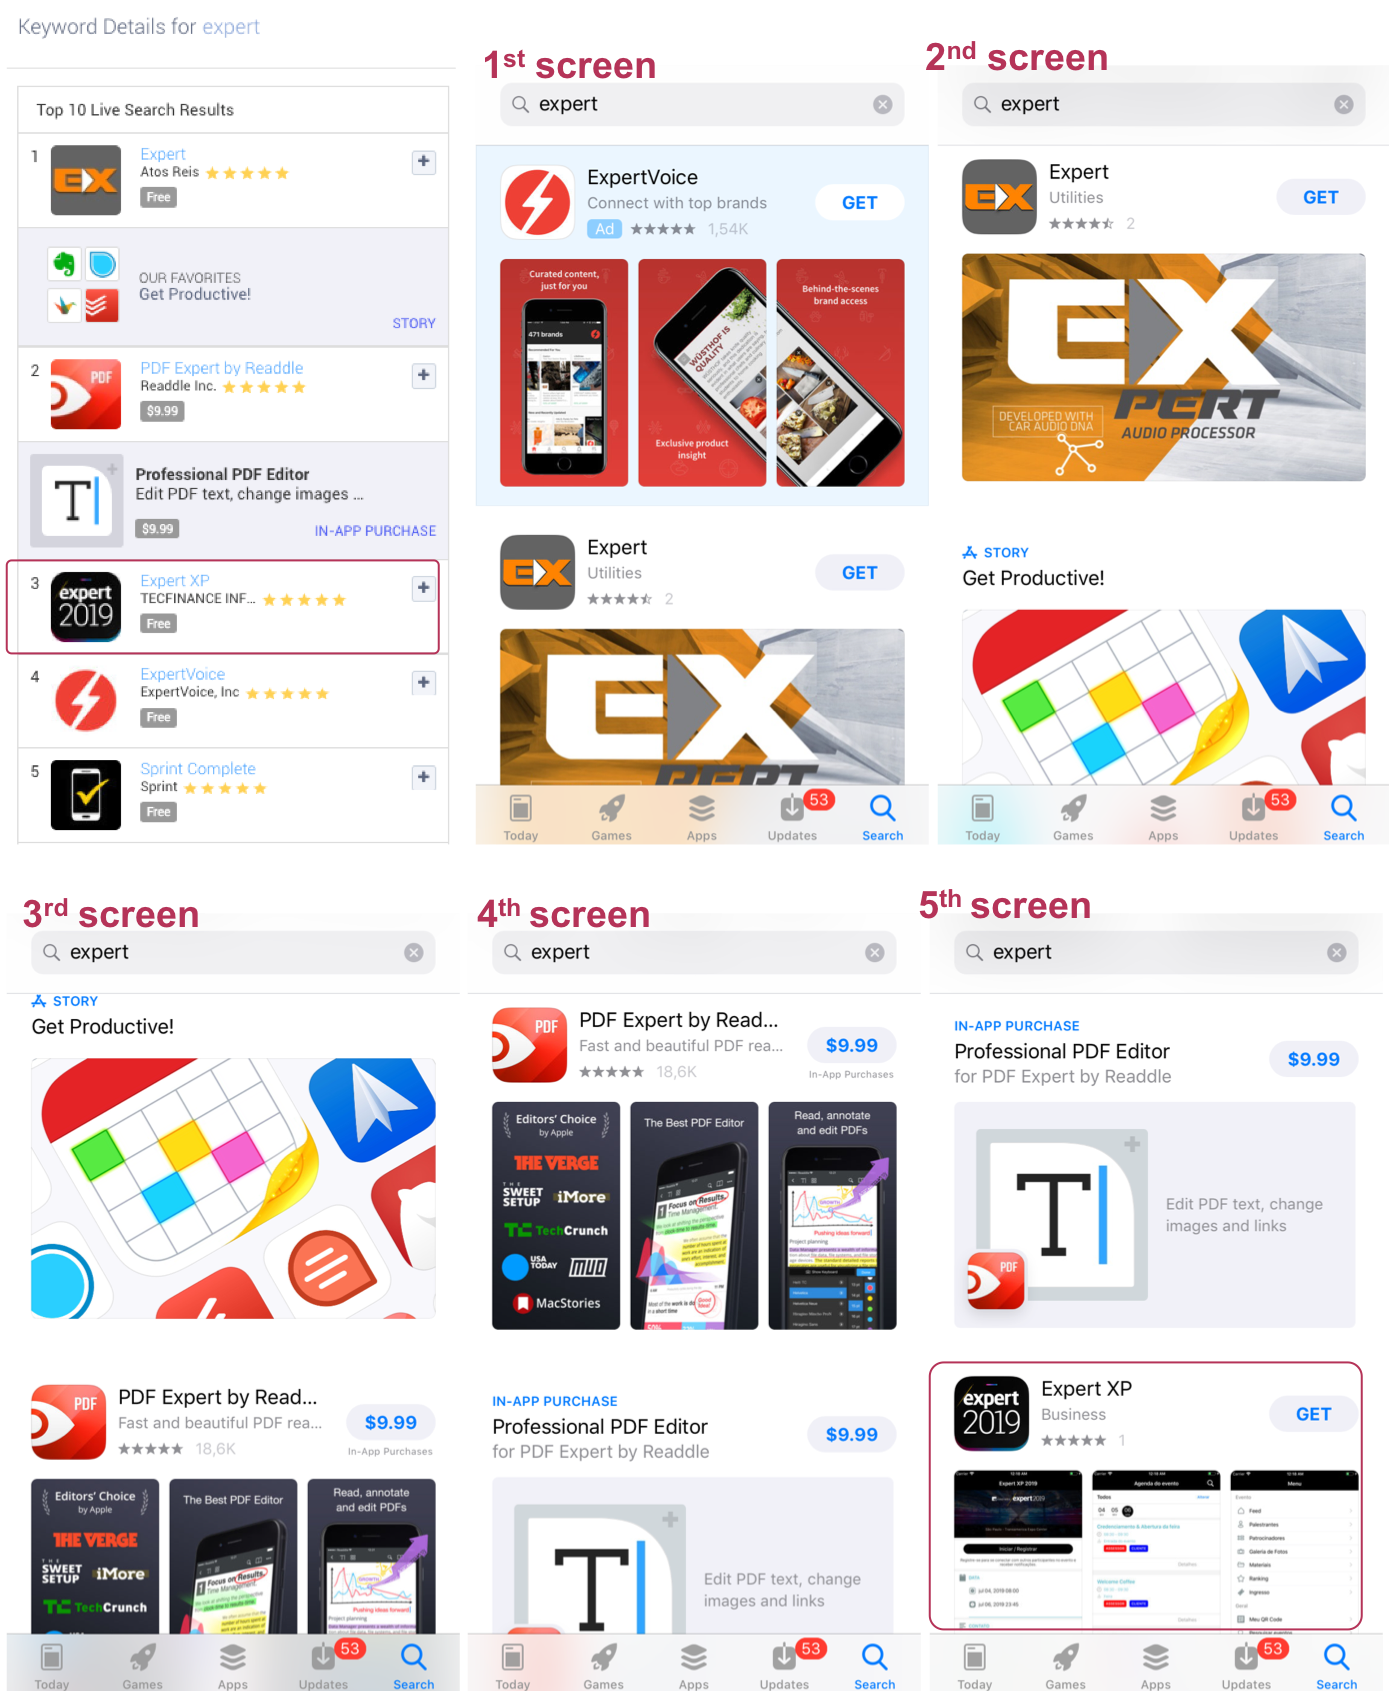 The app Expert XP is the 3rd app to rank on “expert” in the US App Store, but it is only visible in Search Results on the iPhone after 4 scrolls. 